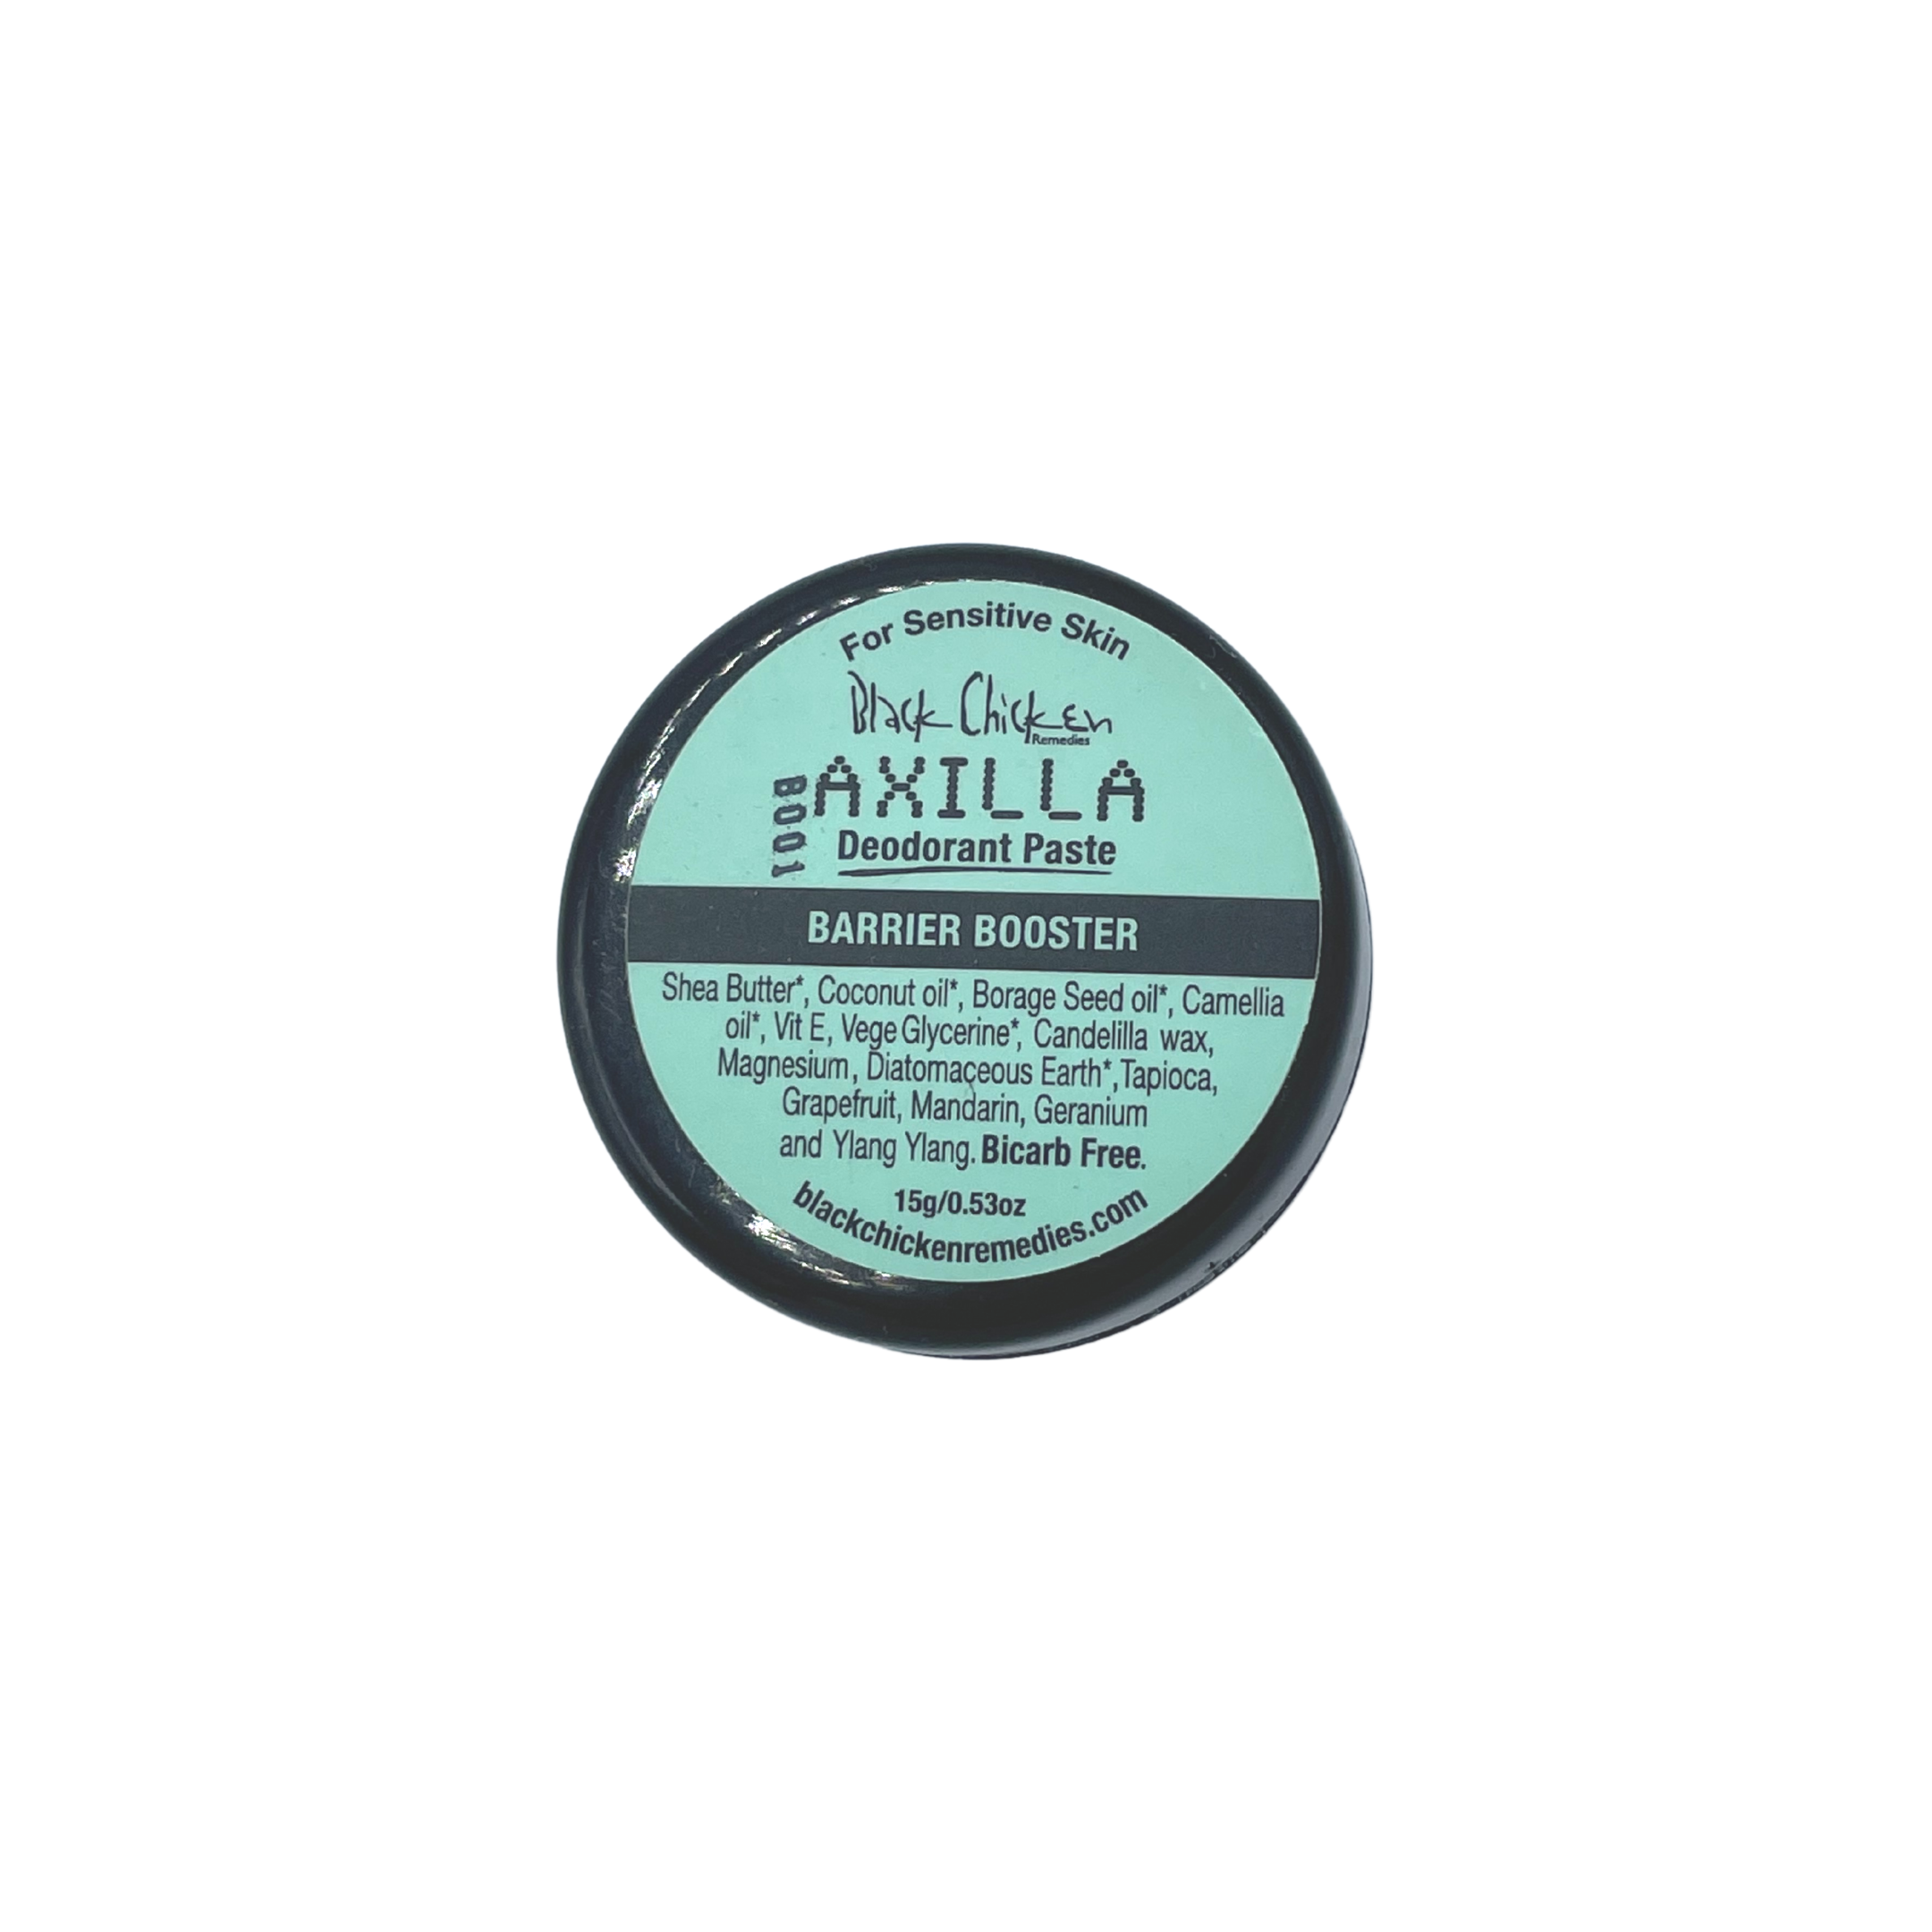 Axilla Deodorant Paste Barrier Booster 15g